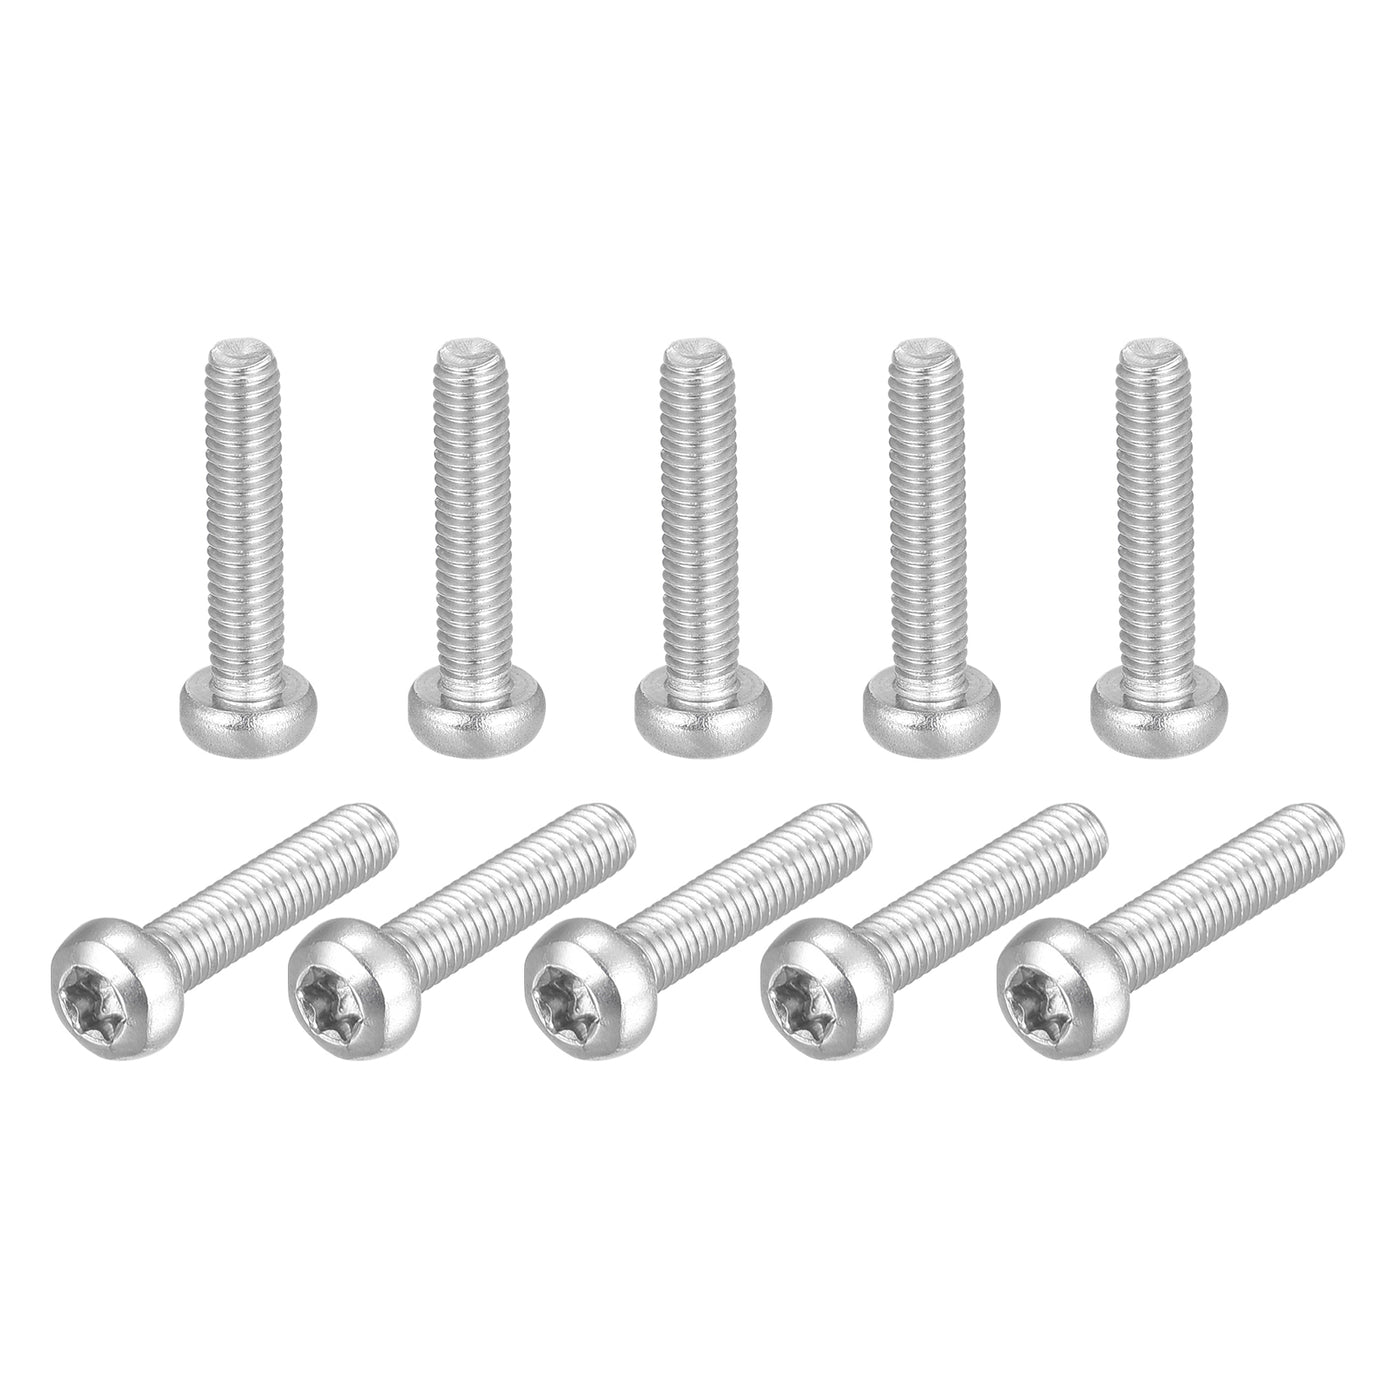 uxcell Uxcell M3x14mm Torx Security Machine Screws, 20pcs 316 Stainless Steel Pan Head Screw